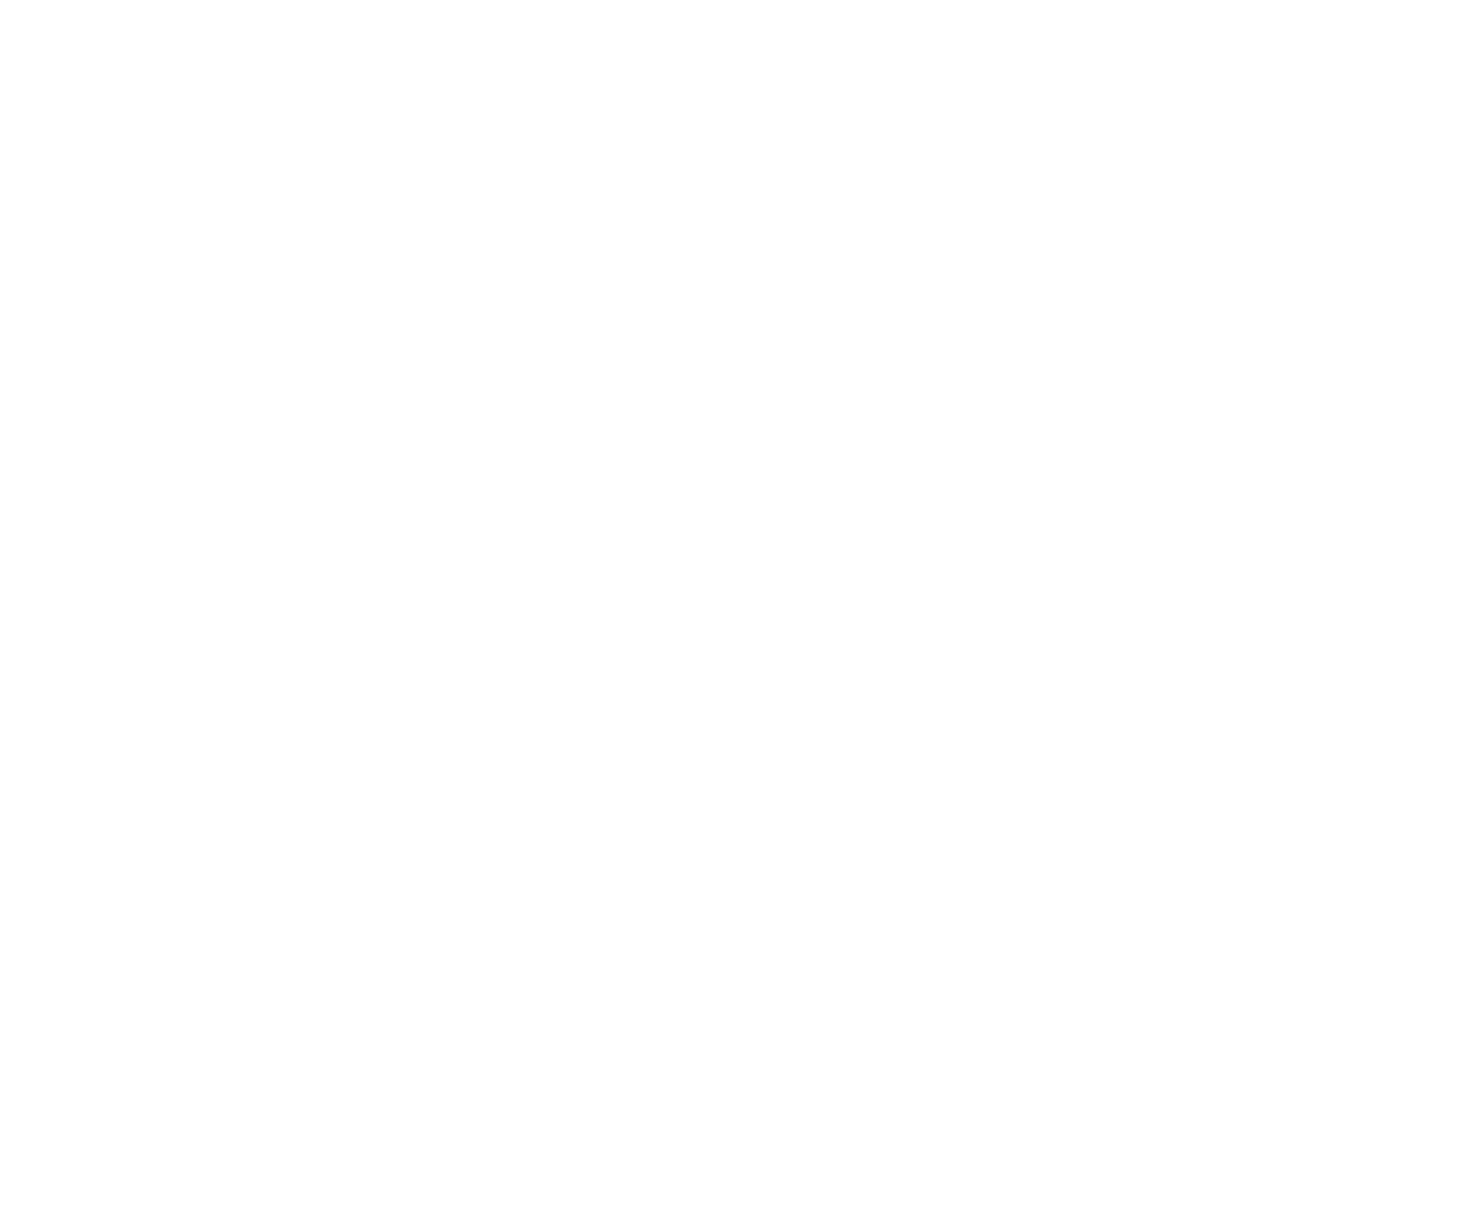 Institute for Advanced Thought on Aging